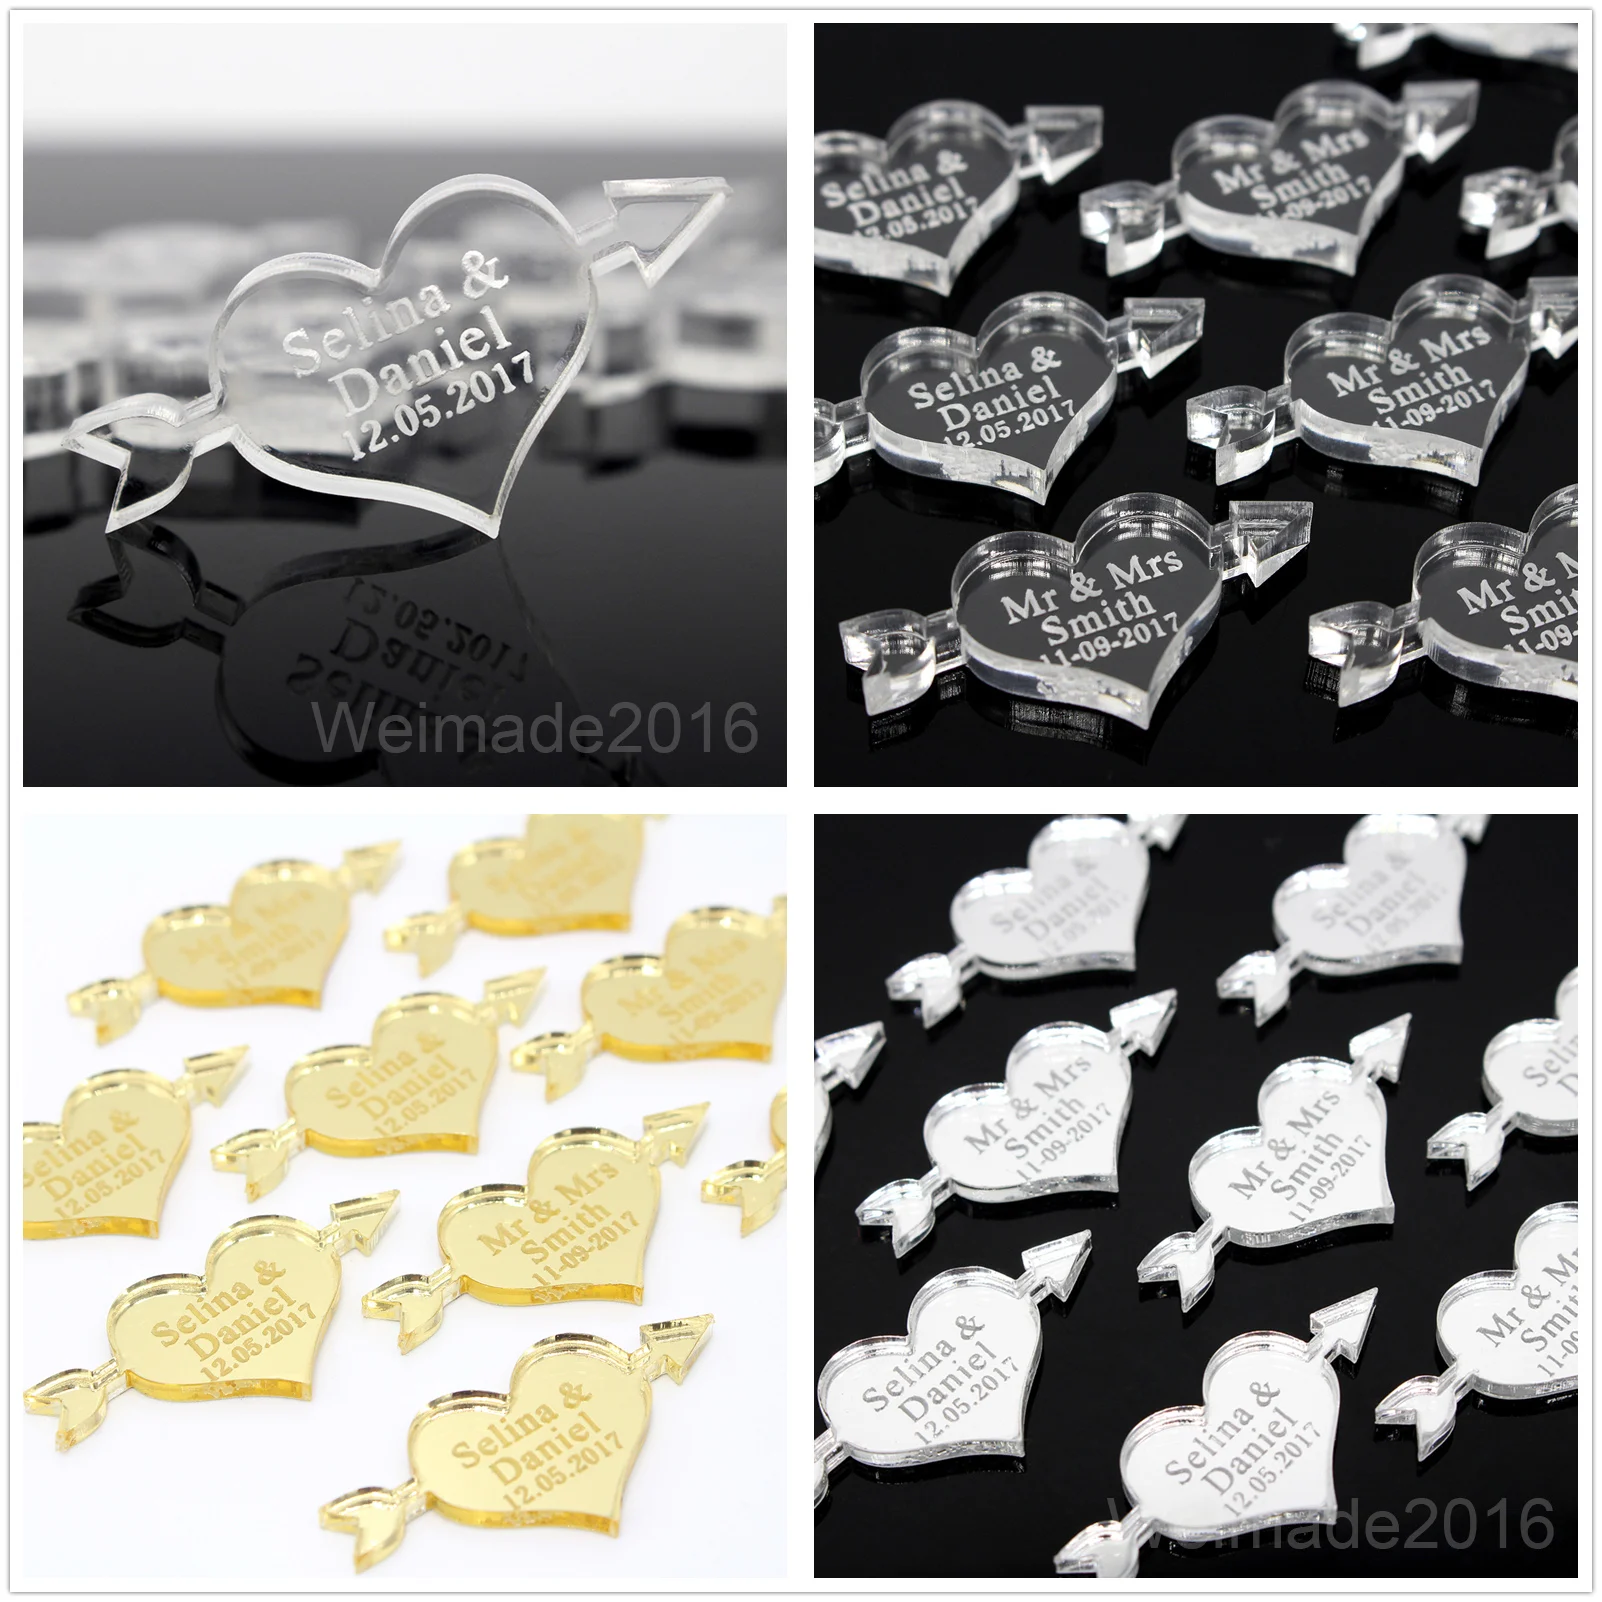 

50pcs Personalized Engraved Acrylic Mr & Mrs Surname Love Heart Wedding Party Table Centerpieces Confetti Decoration Favors Gift